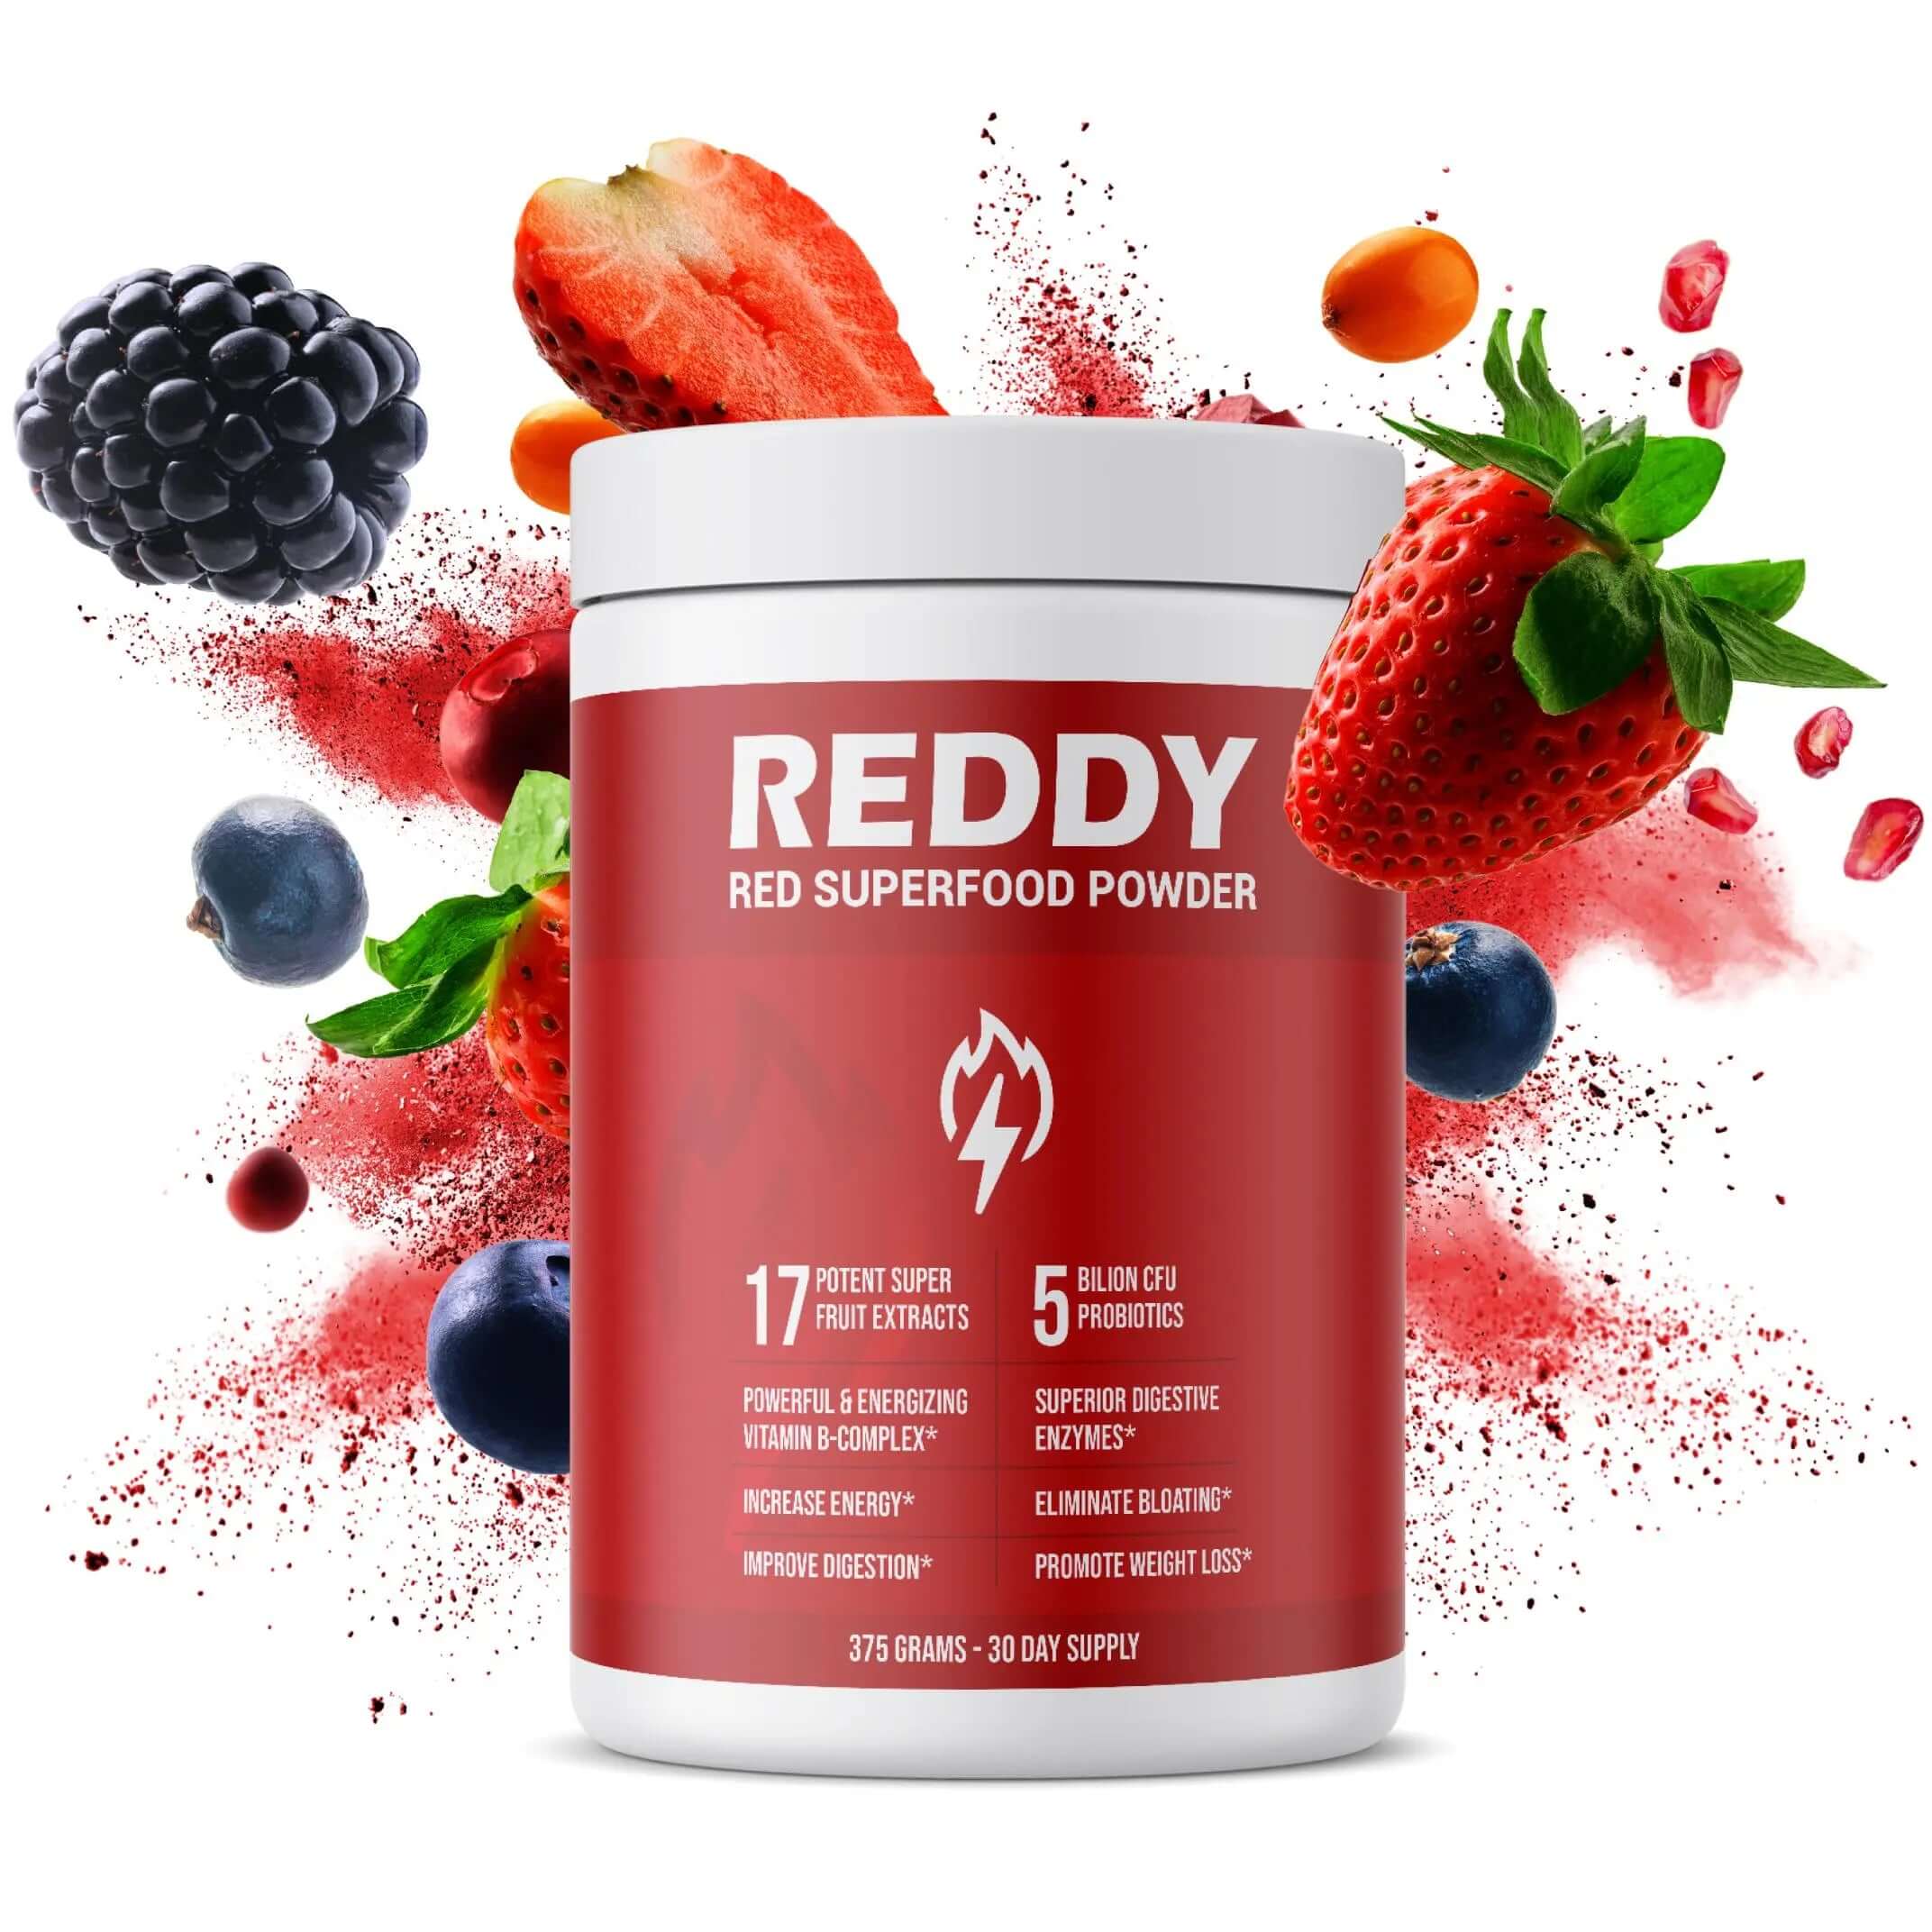 Fruits bursting from Reddy Red Superfood Powder bottle